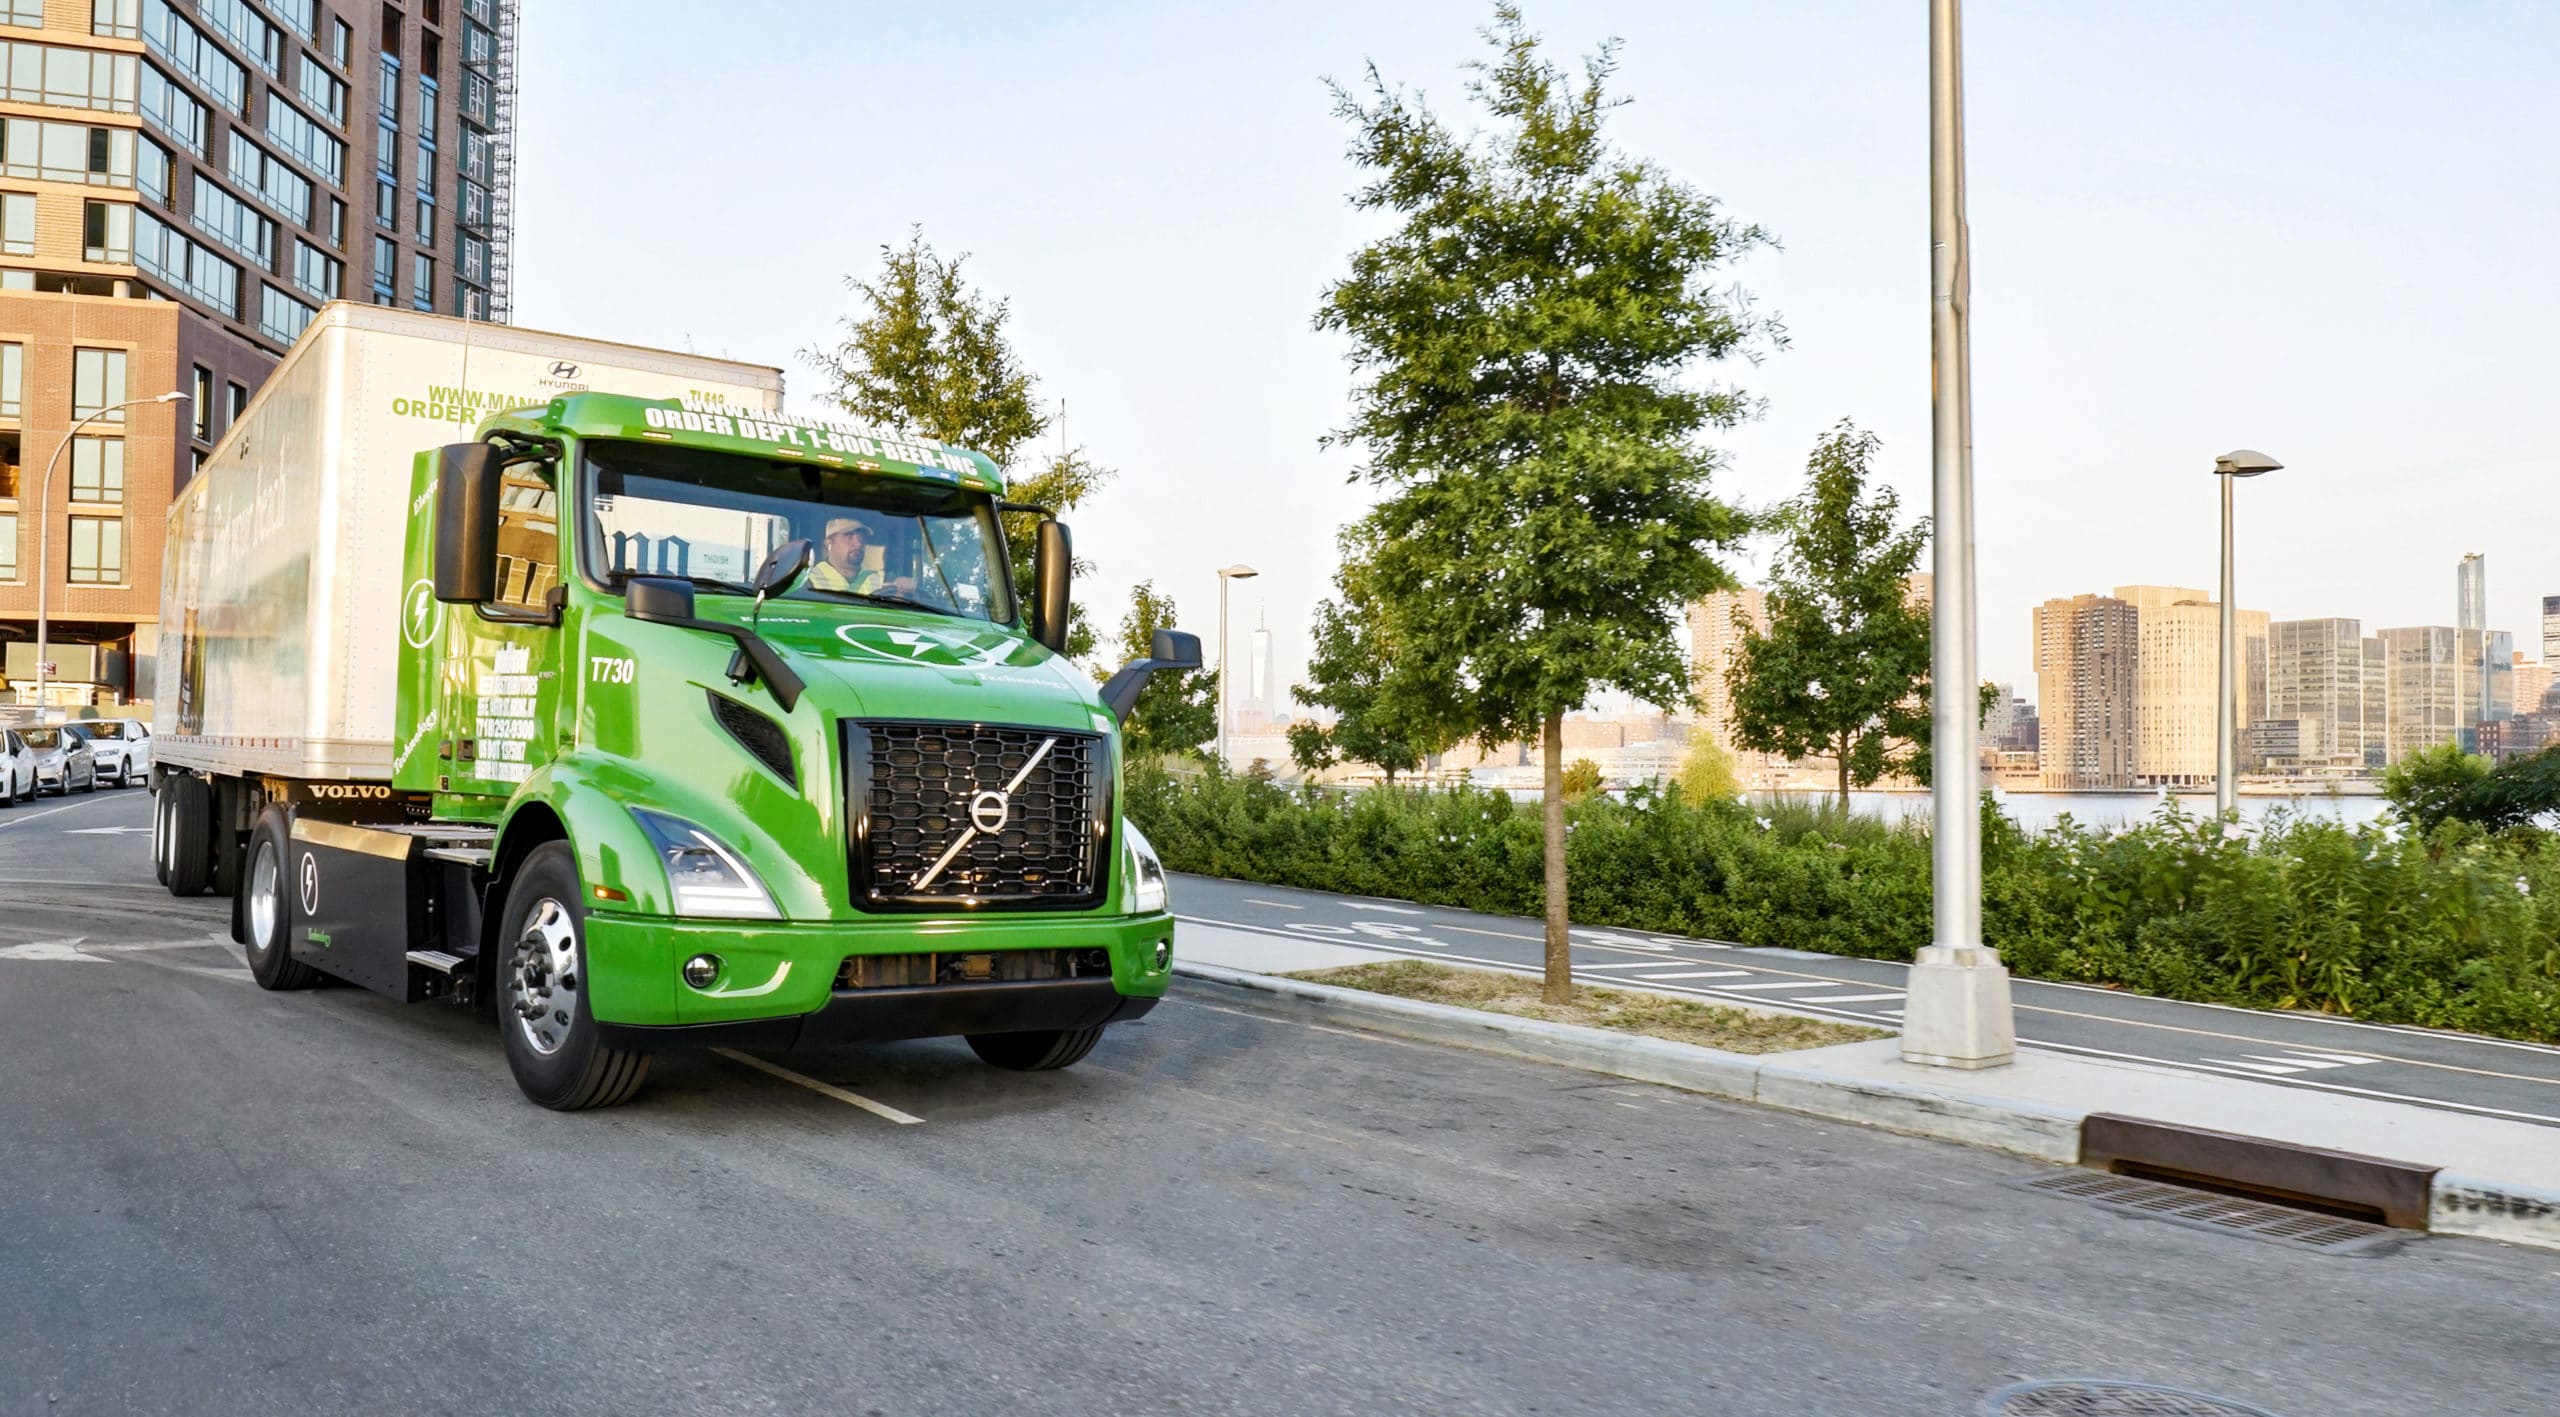 https://theevreport.com/volvo-trucks-launches-vnr-electric-model-in-the-united-states-and-canada